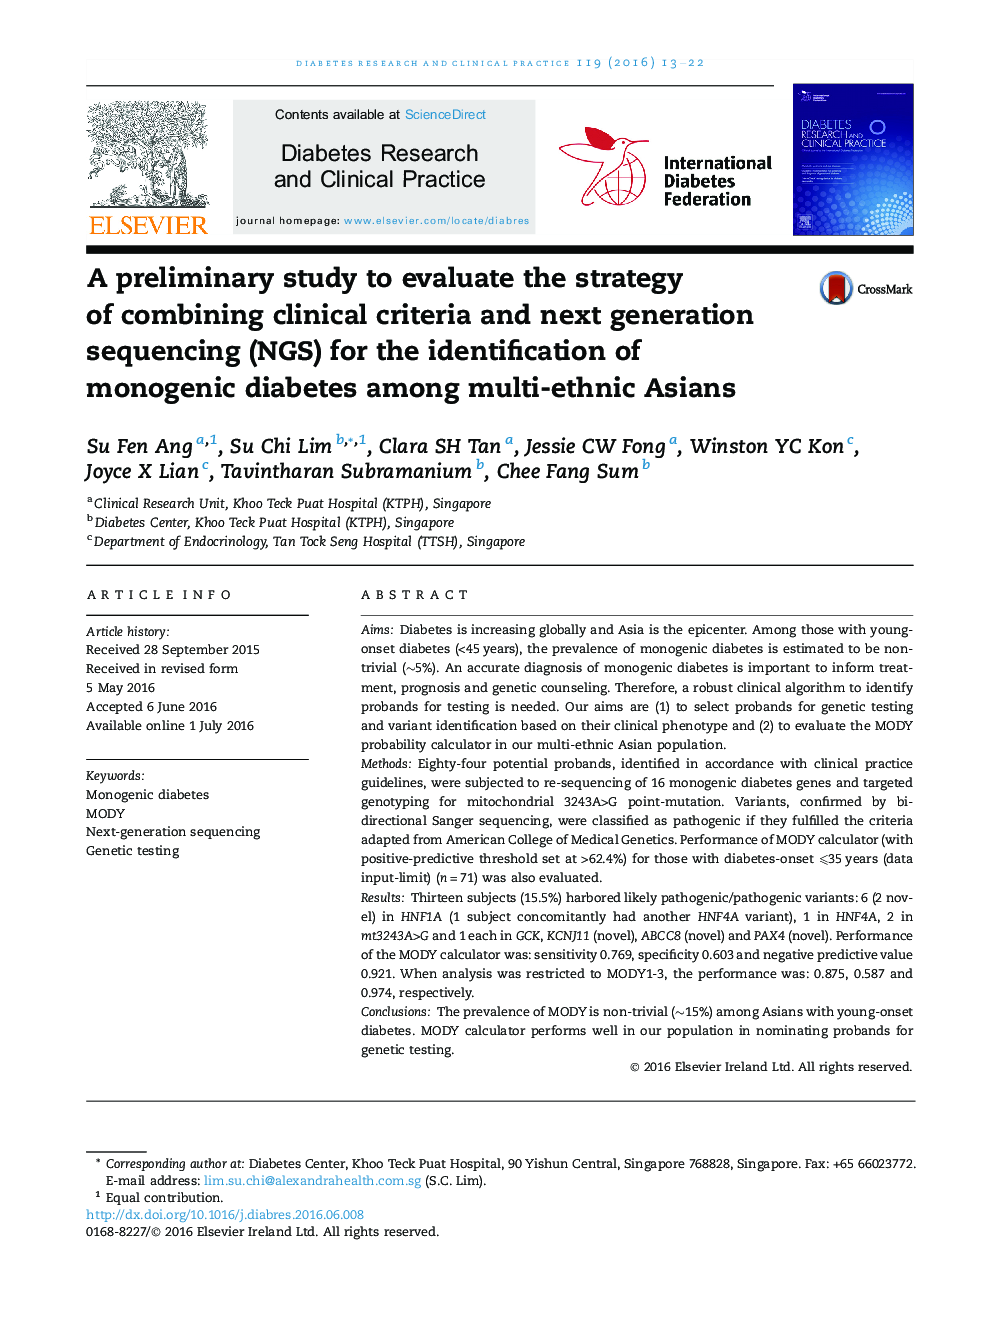 A preliminary study to evaluate the strategy of combining clinical criteria and next generation sequencing (NGS) for the identification of monogenic diabetes among multi-ethnic Asians